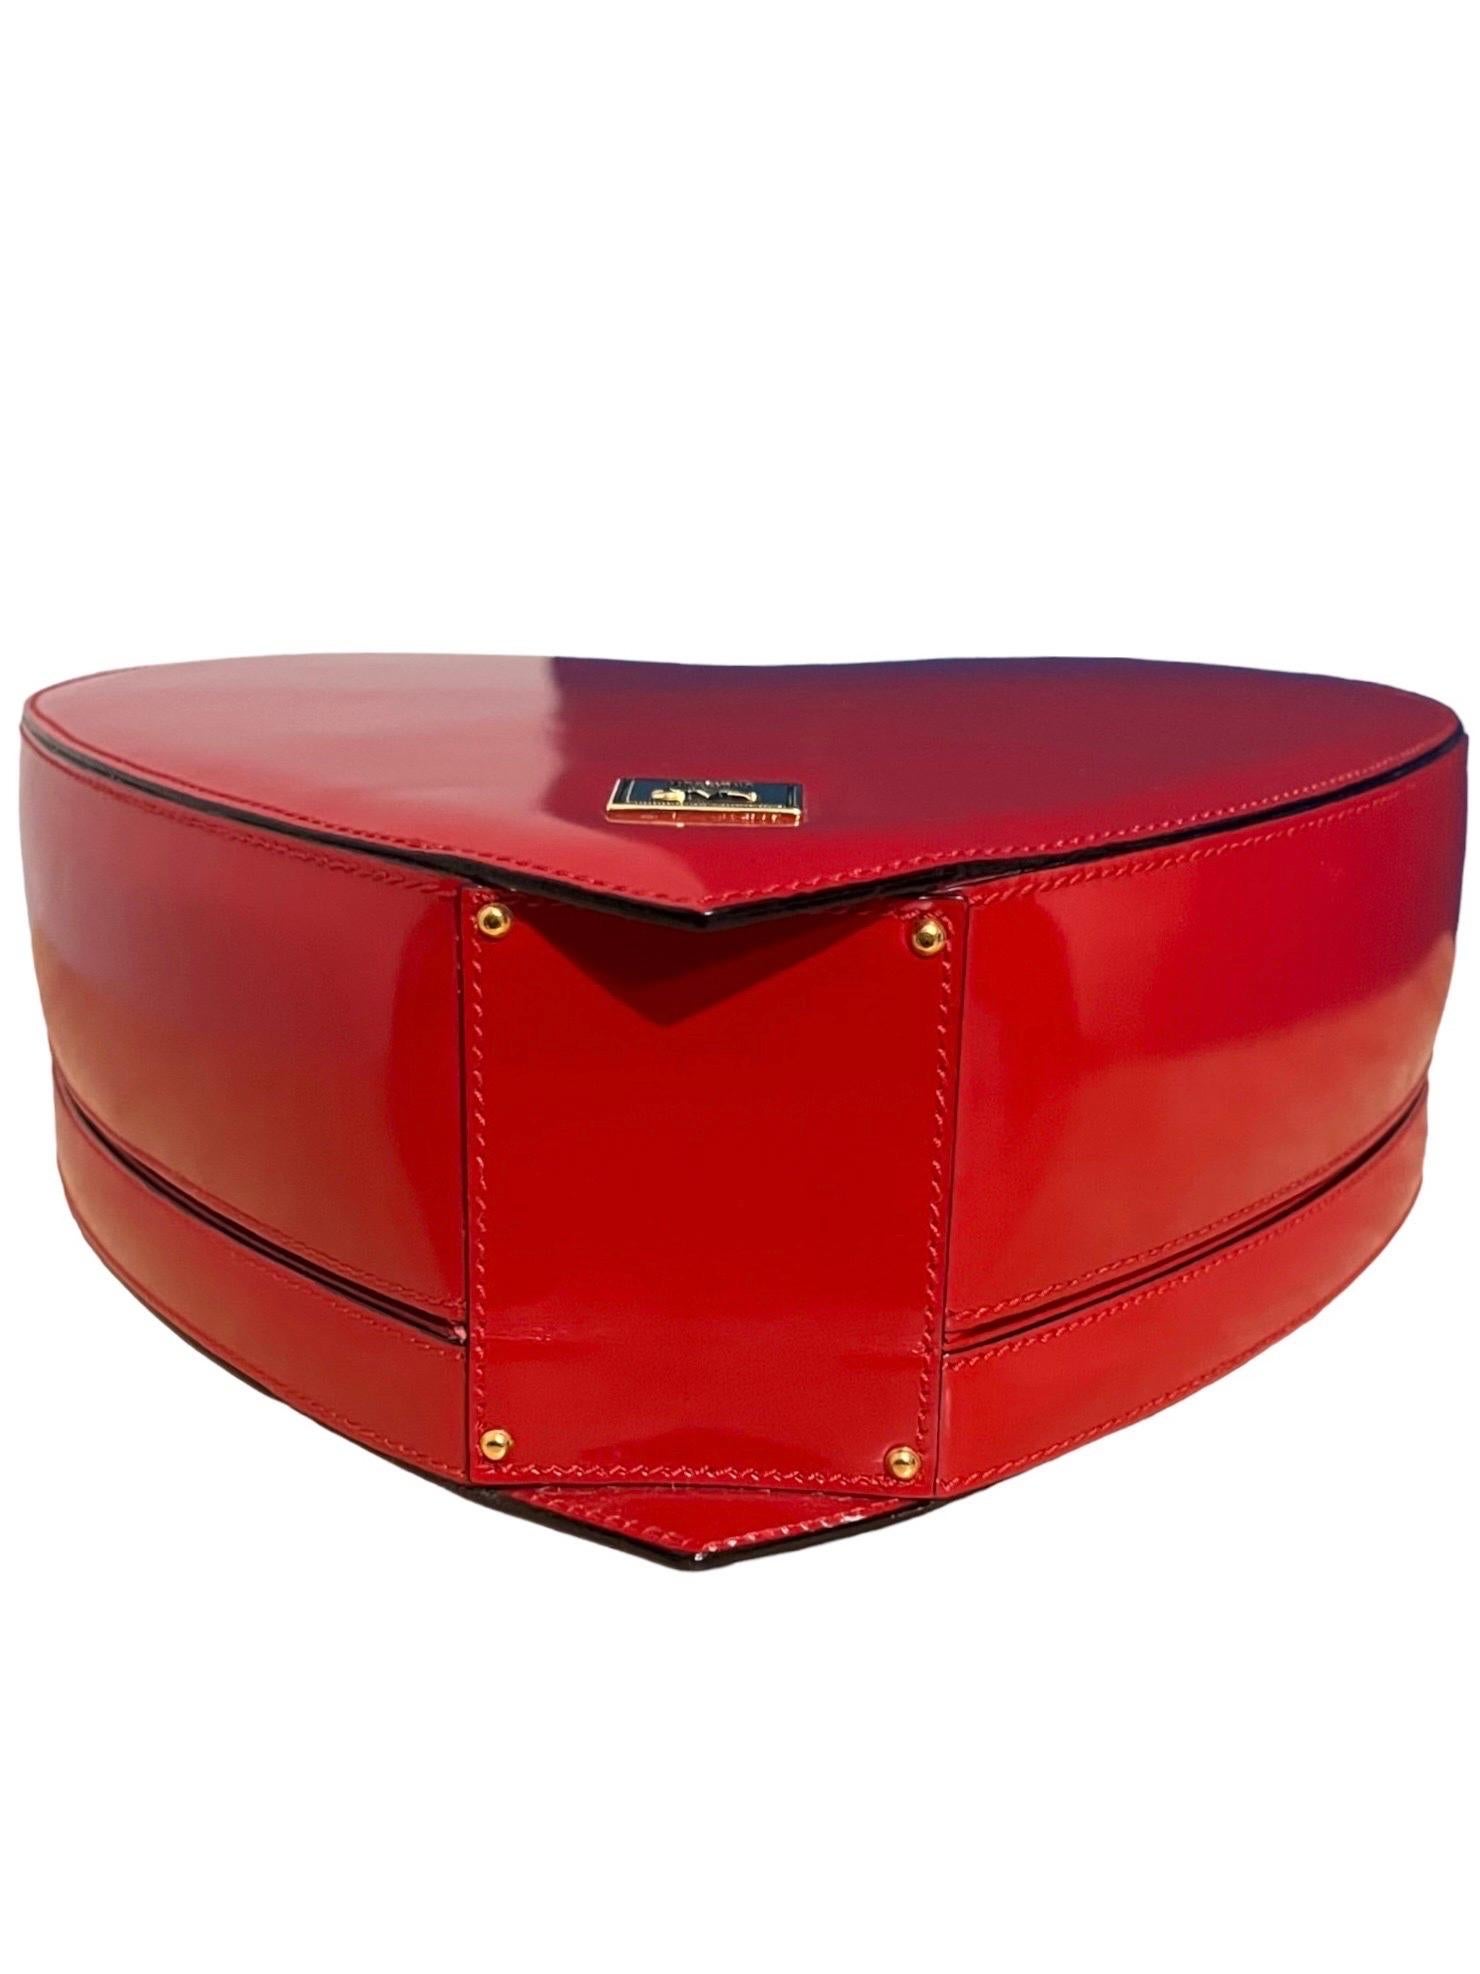 Moschino Vintage Red Leather Heart Bag The Nanny 4